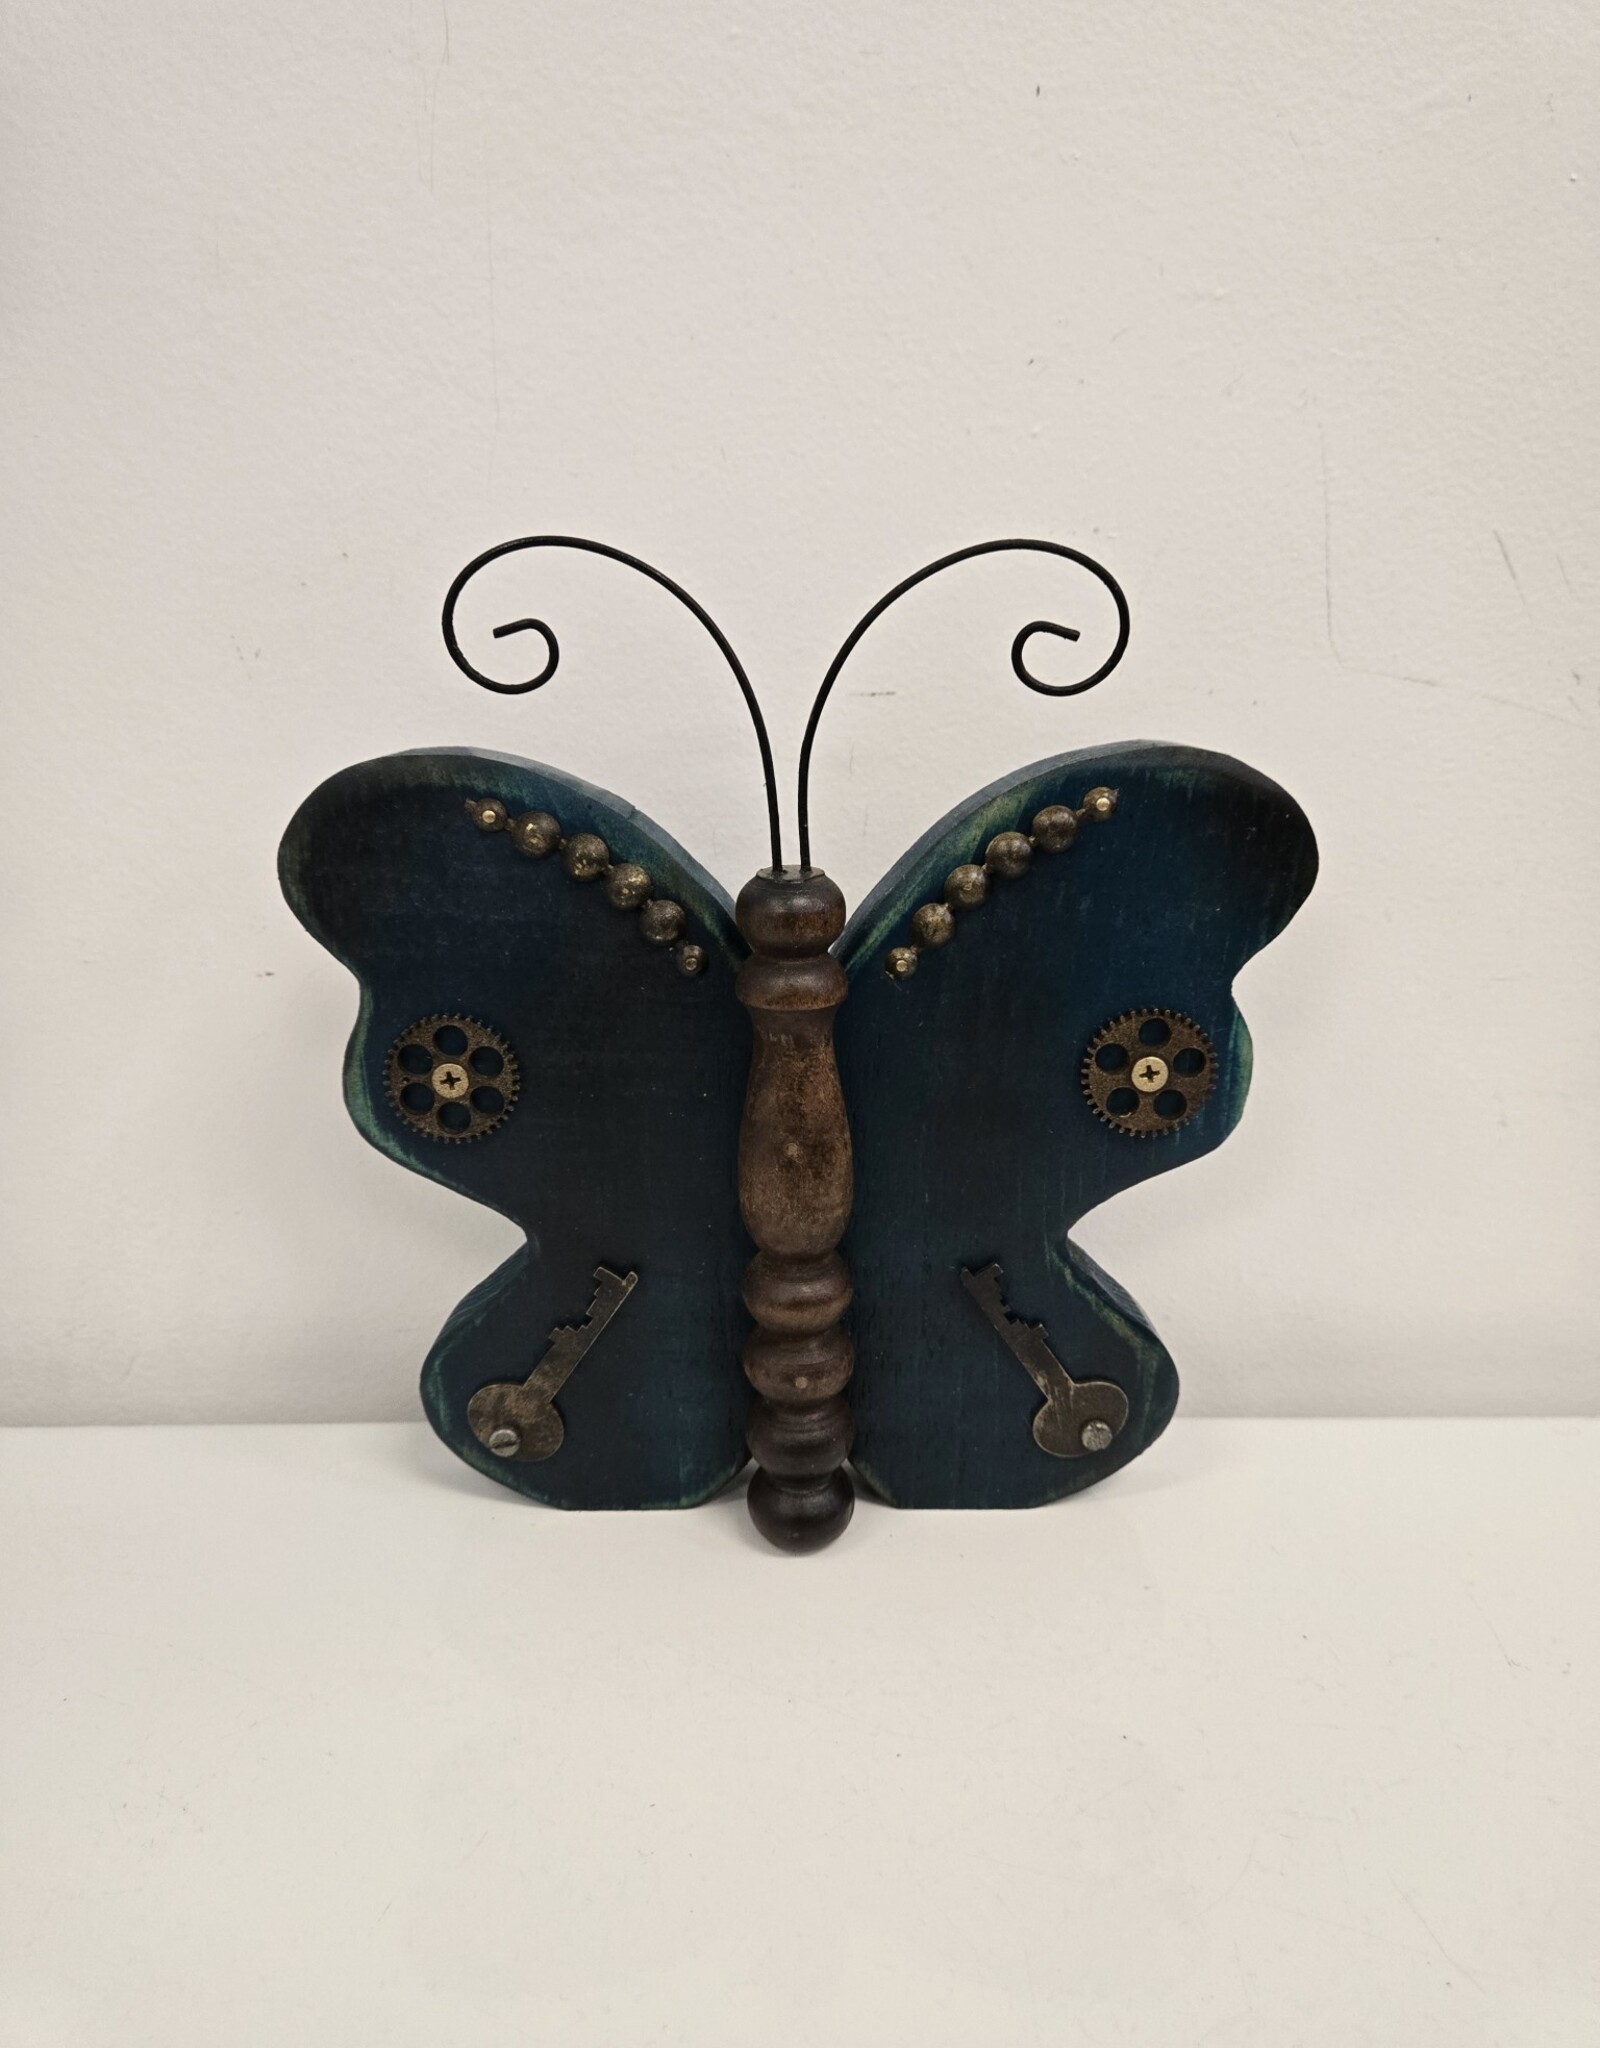 Whimsical Wooden Butterfly - teal